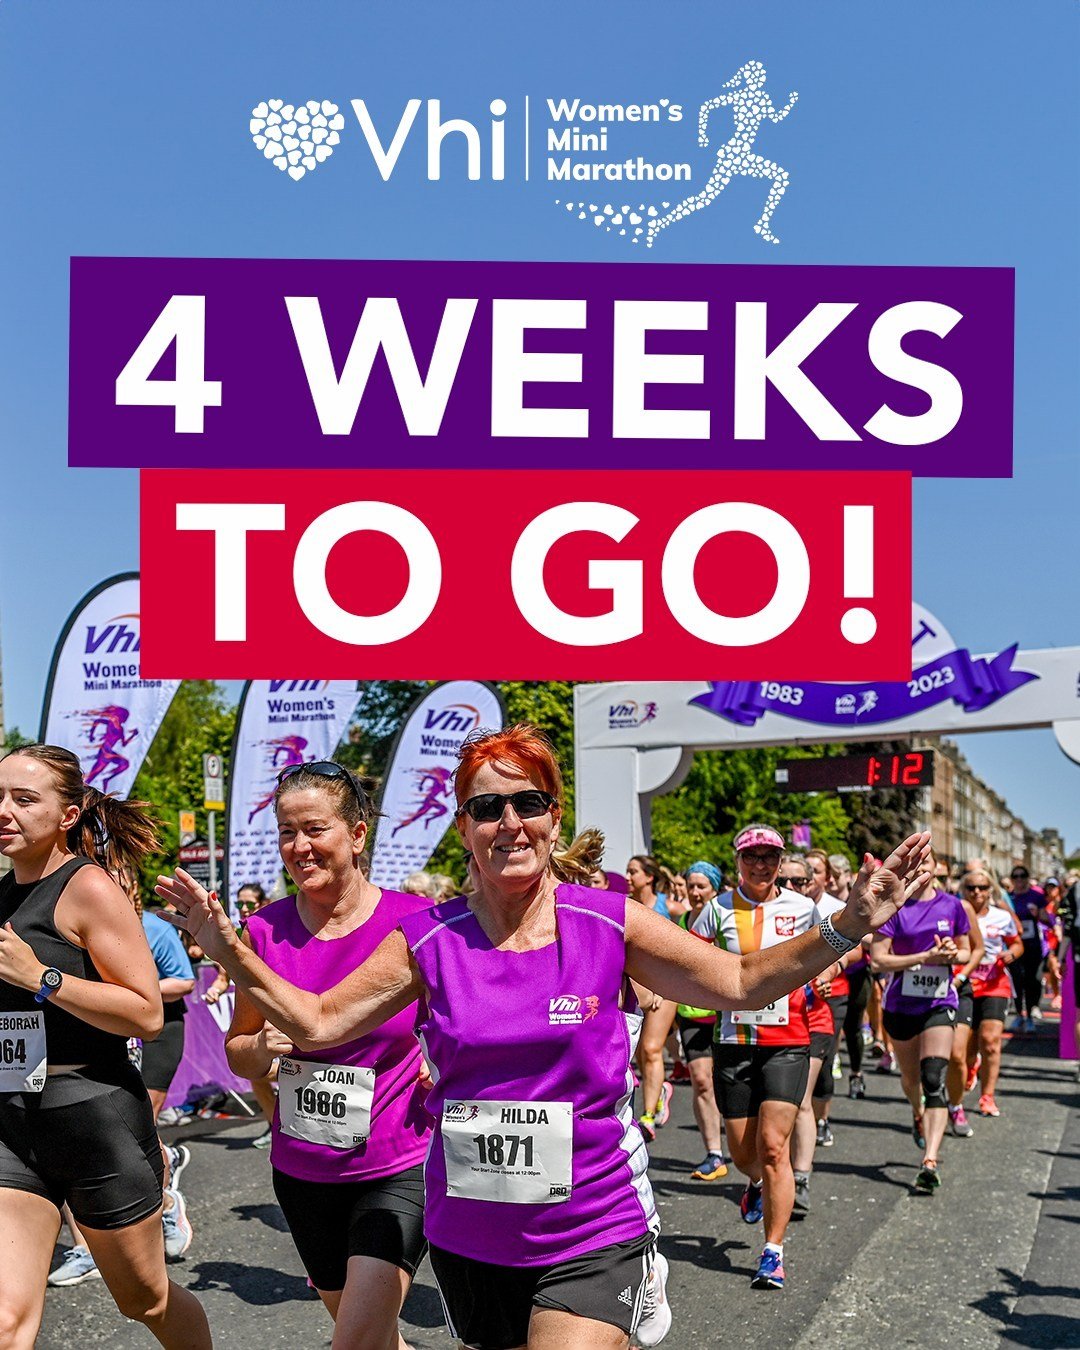 ONLY 4 WEEKS TO GO! 😱🤩 Who's excited?!

#hearttoheart #VhiWMM #Dublin #Ireland #10k